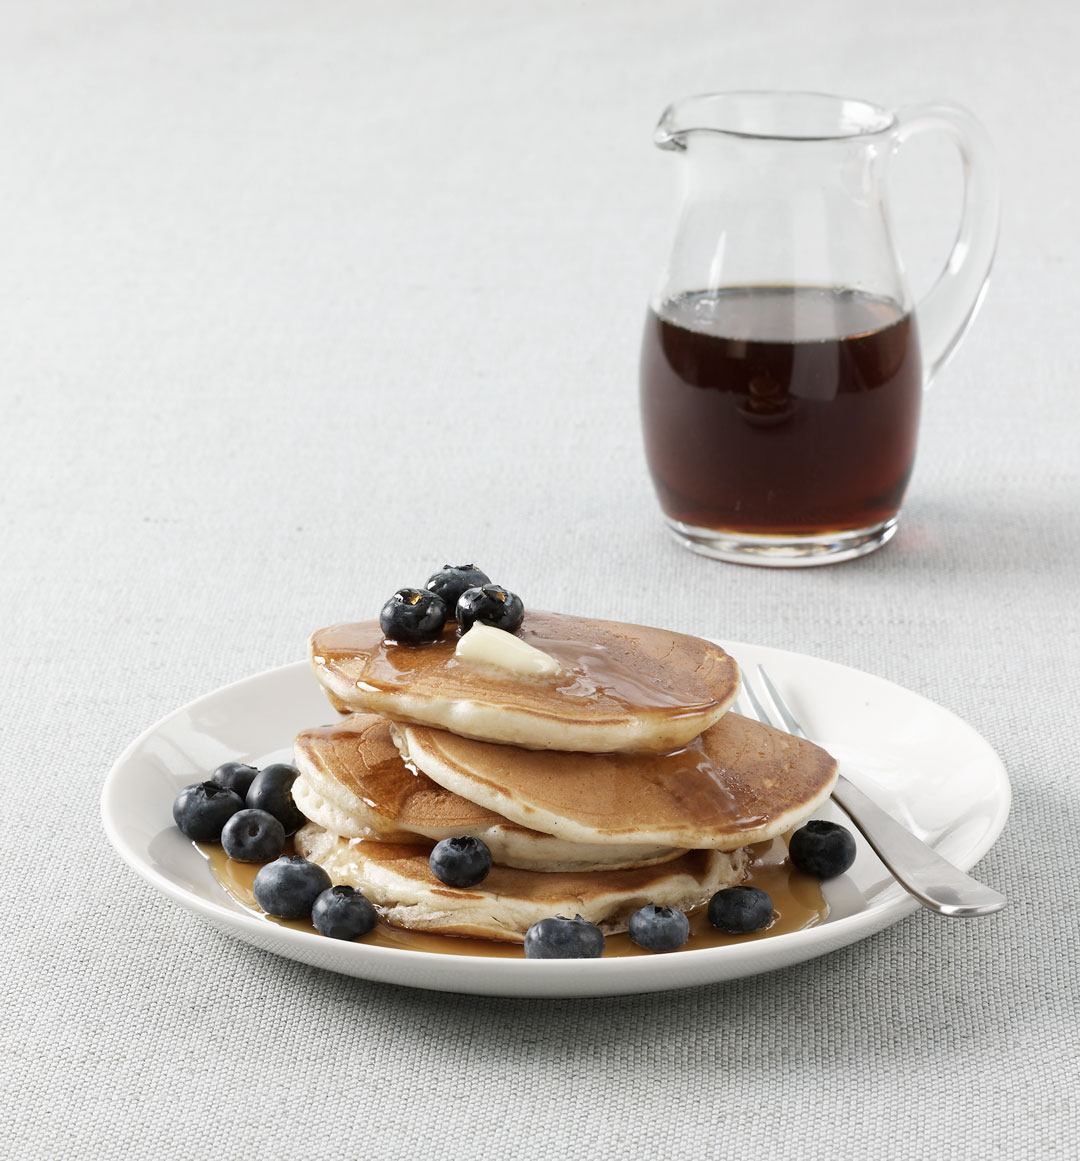 Buttermilk pancakes with blueberries and syrup, as featured in Simple & Classic